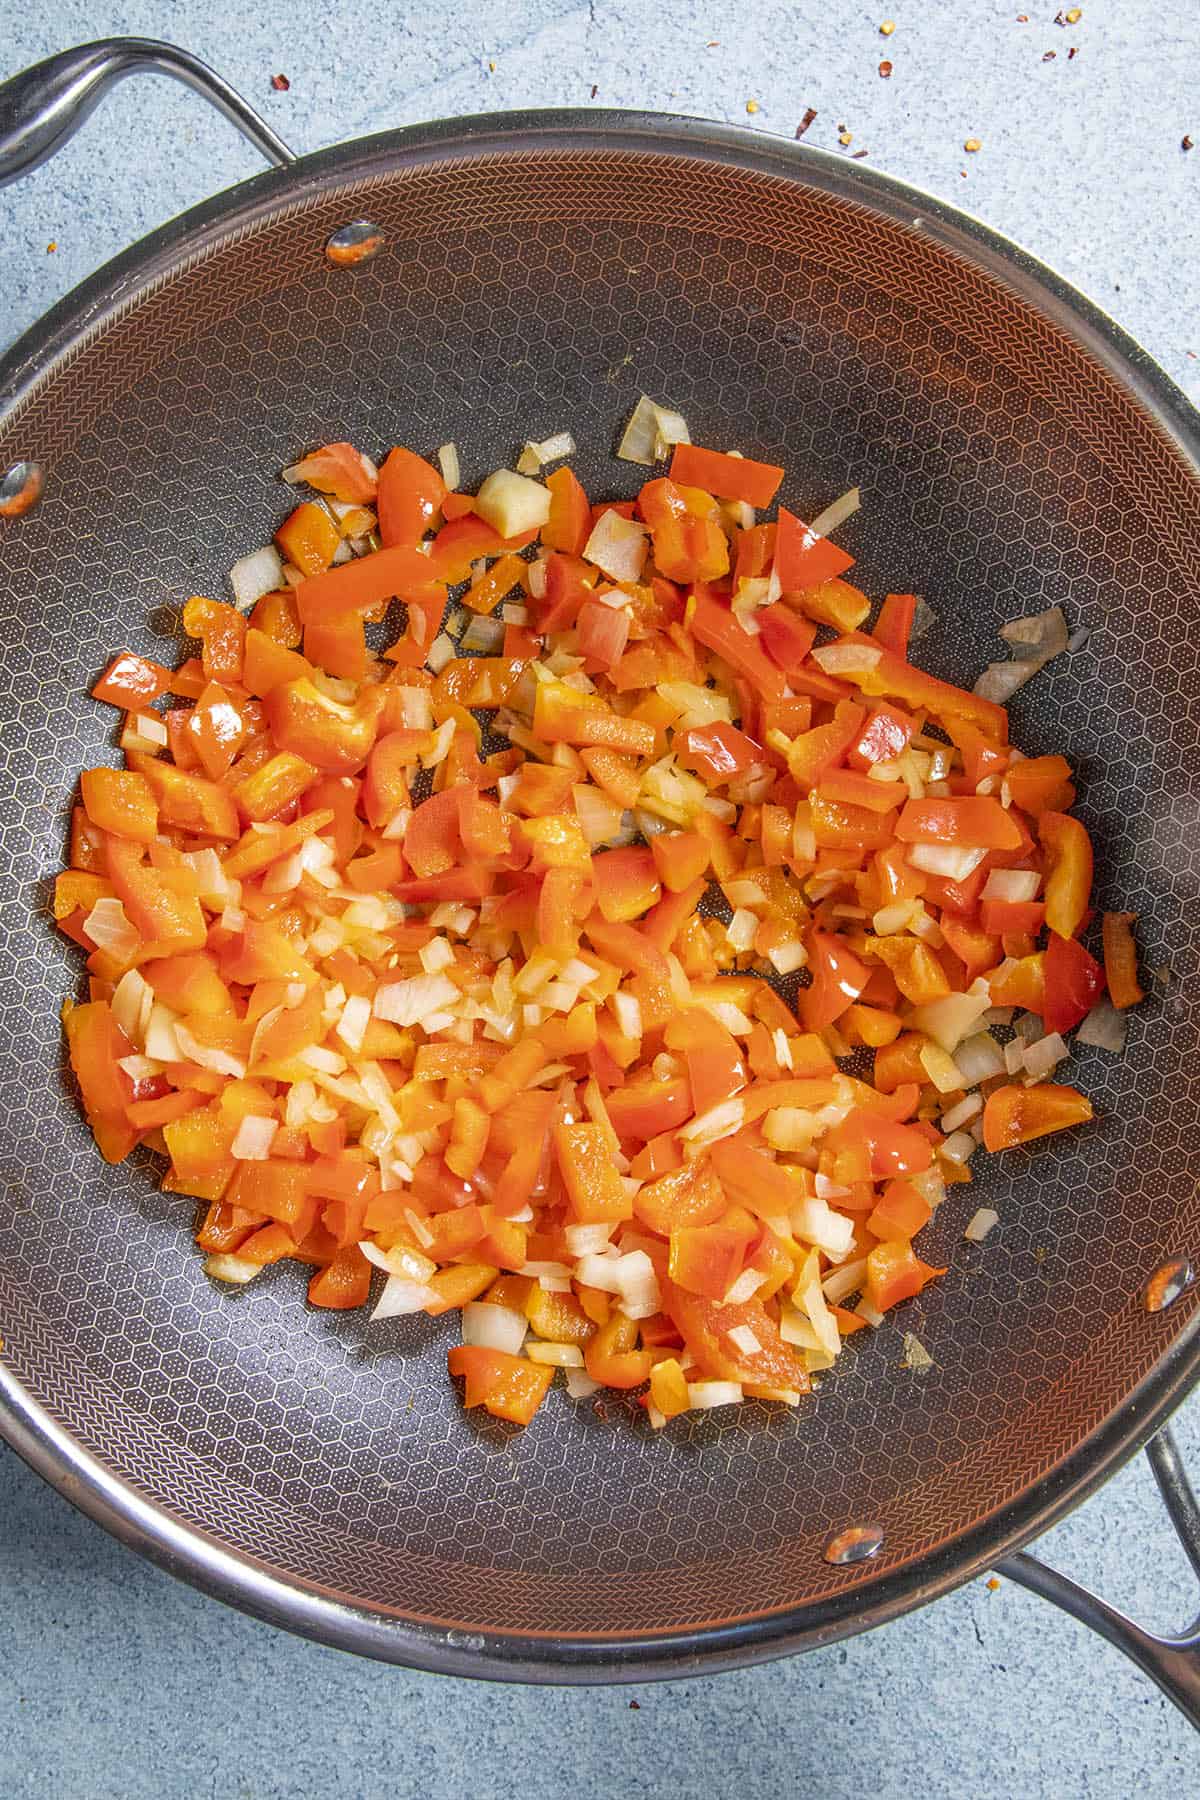 Cooking the vegetables in the pan to make Panang Curry